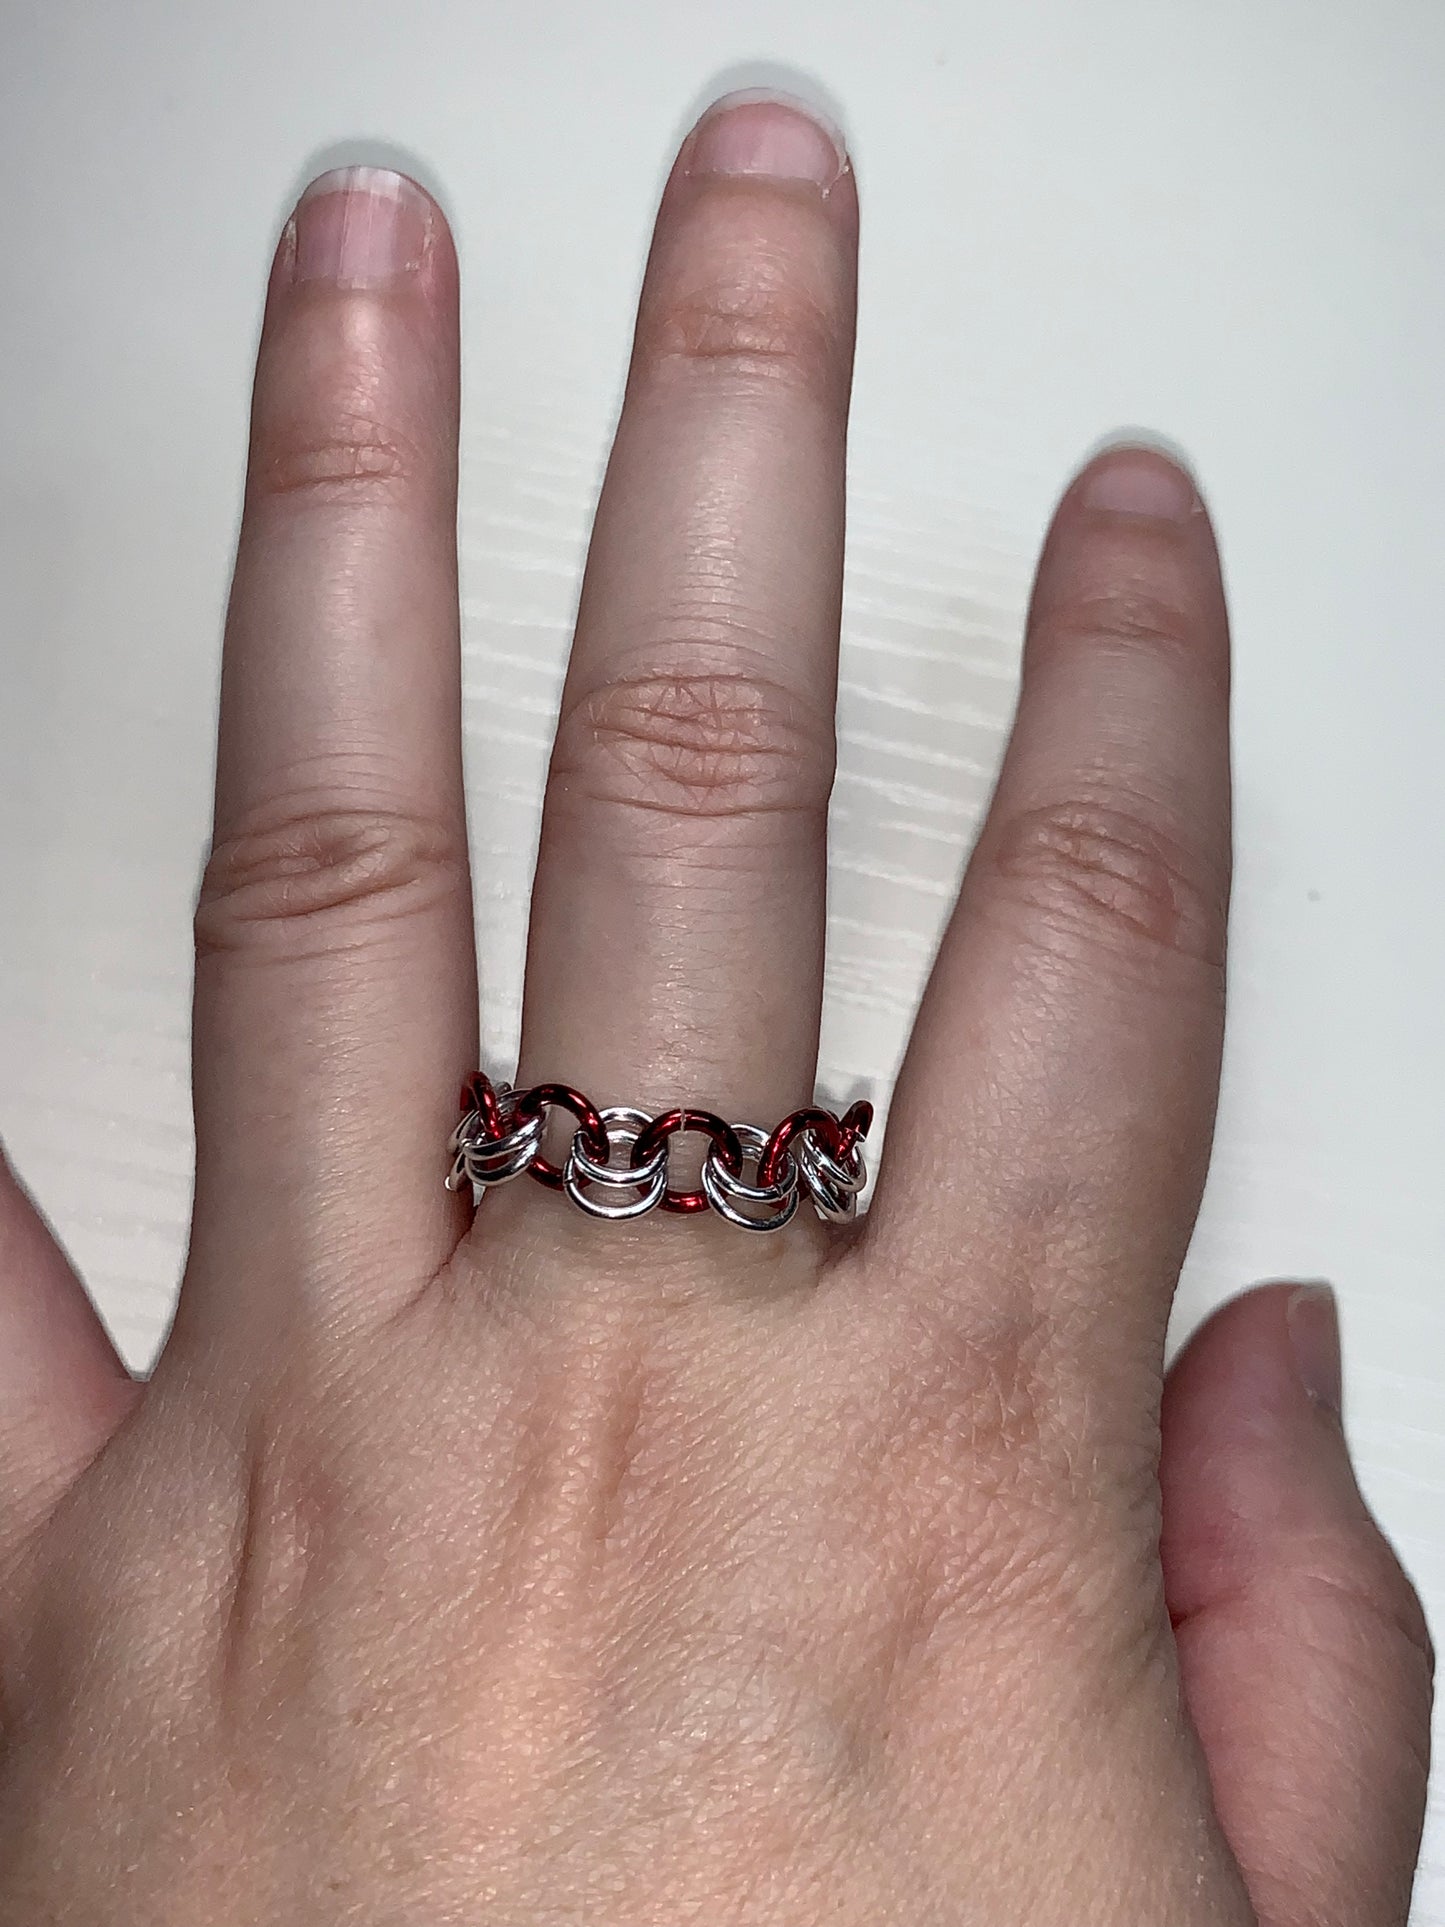 Red and Silver Chainmail ring, Size 11